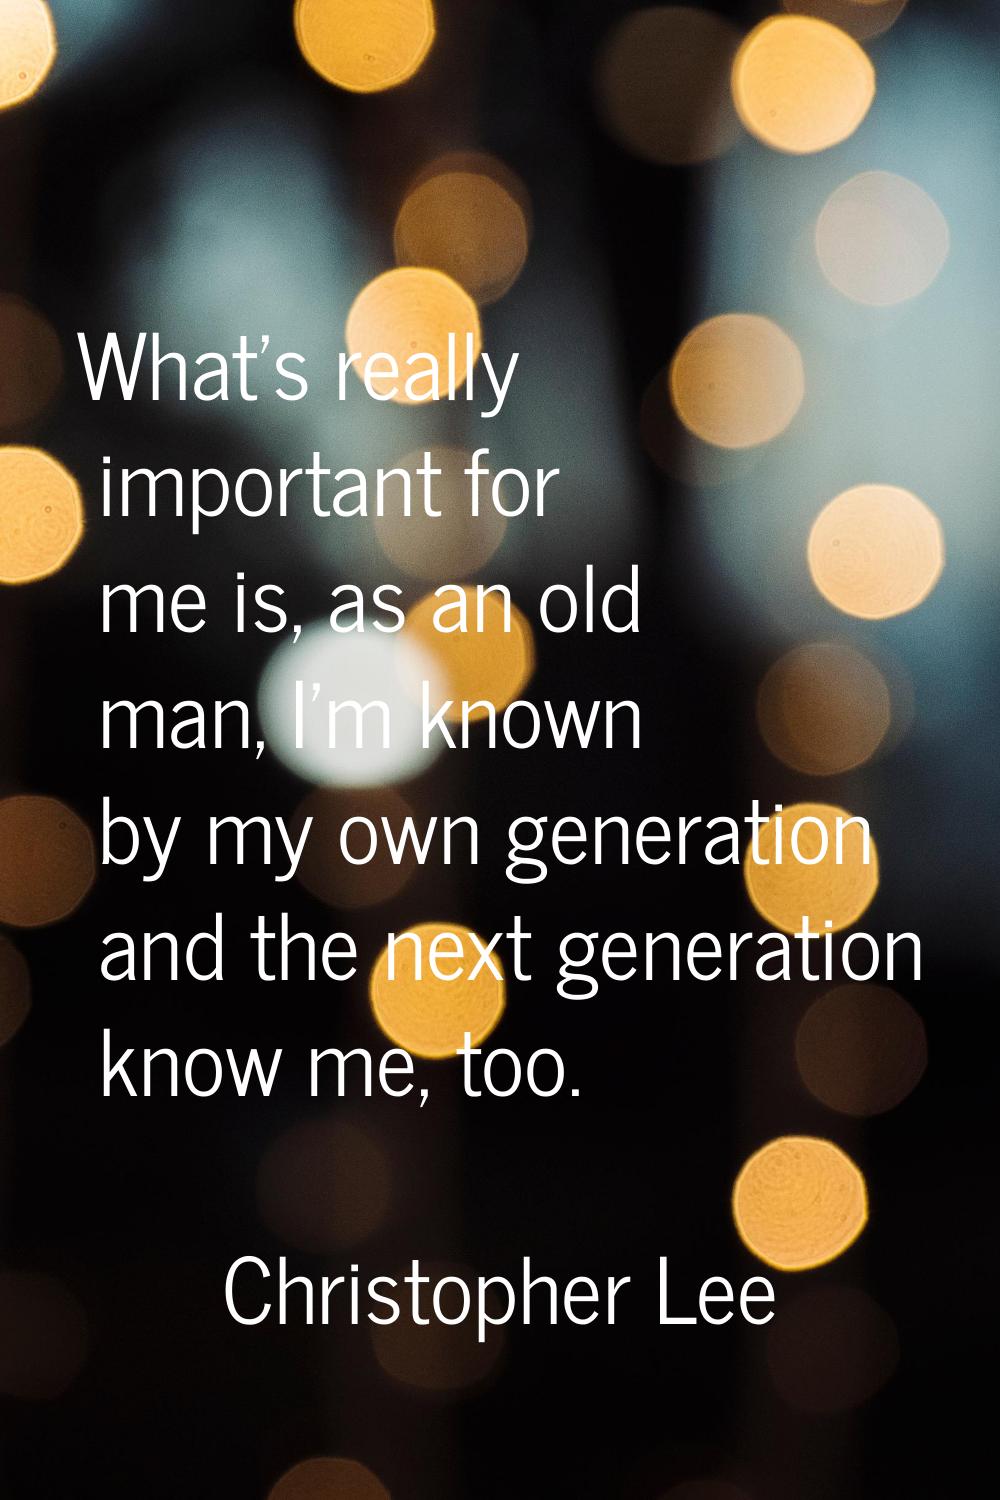 What's really important for me is, as an old man, I'm known by my own generation and the next gener